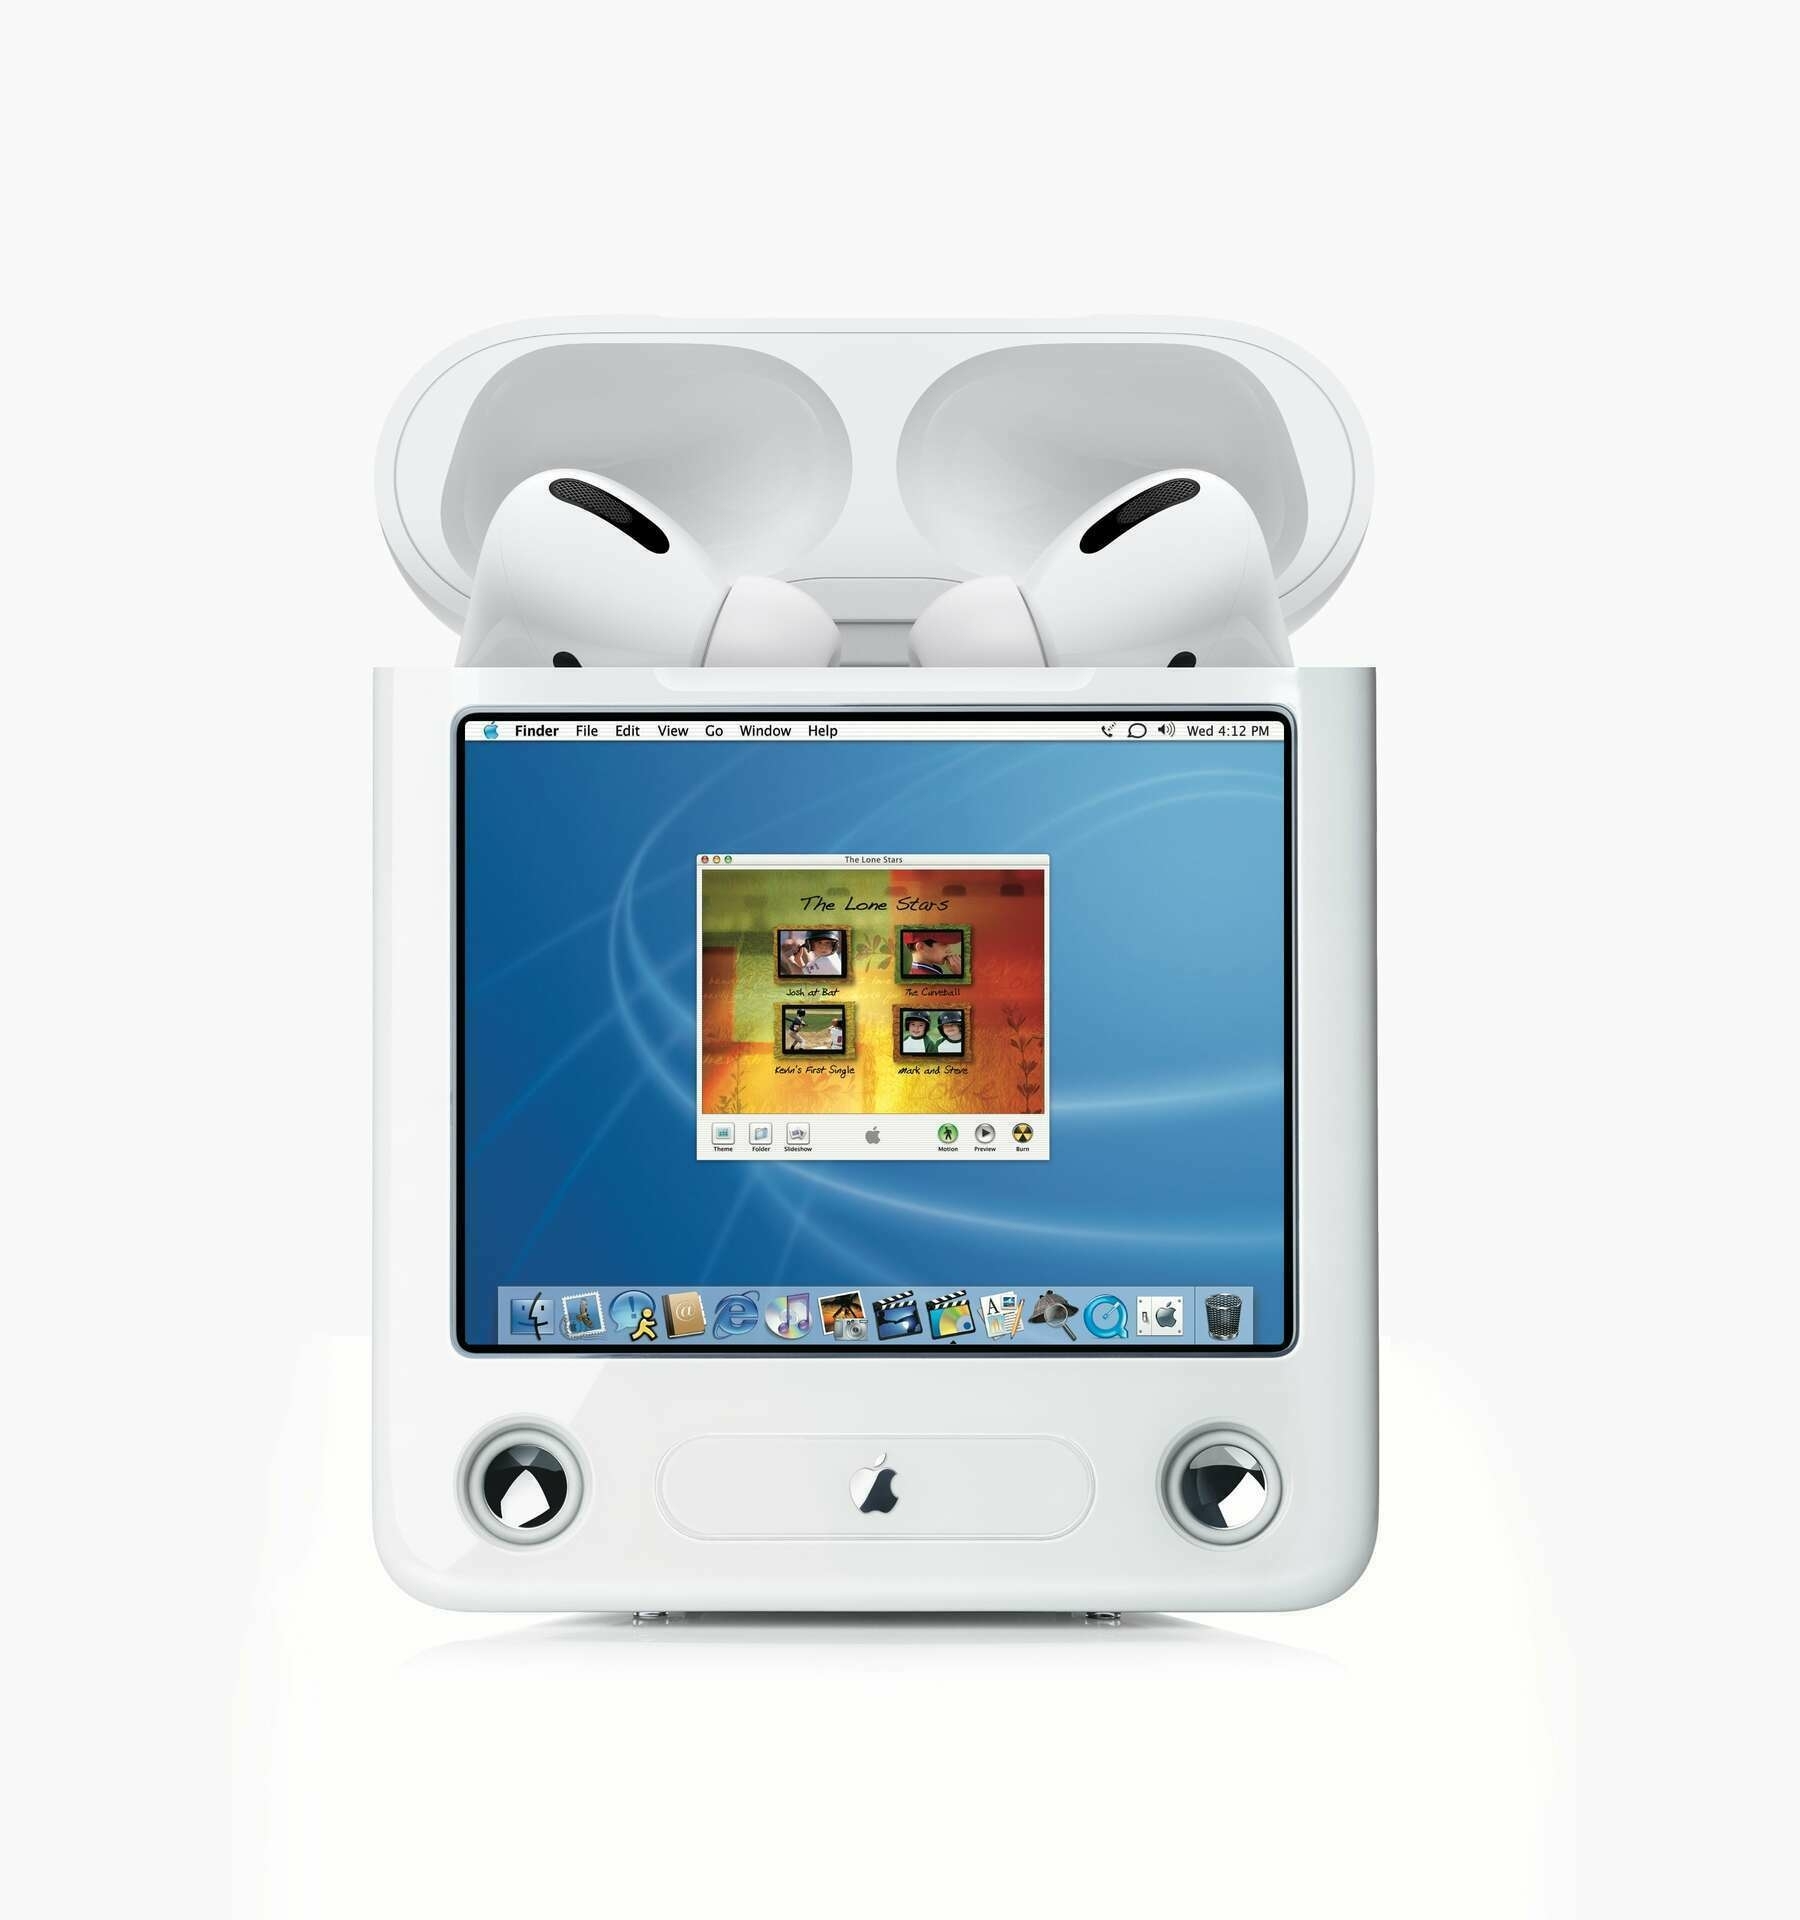 eMac nano with AirPod Pros emerging from the top running iDVD.